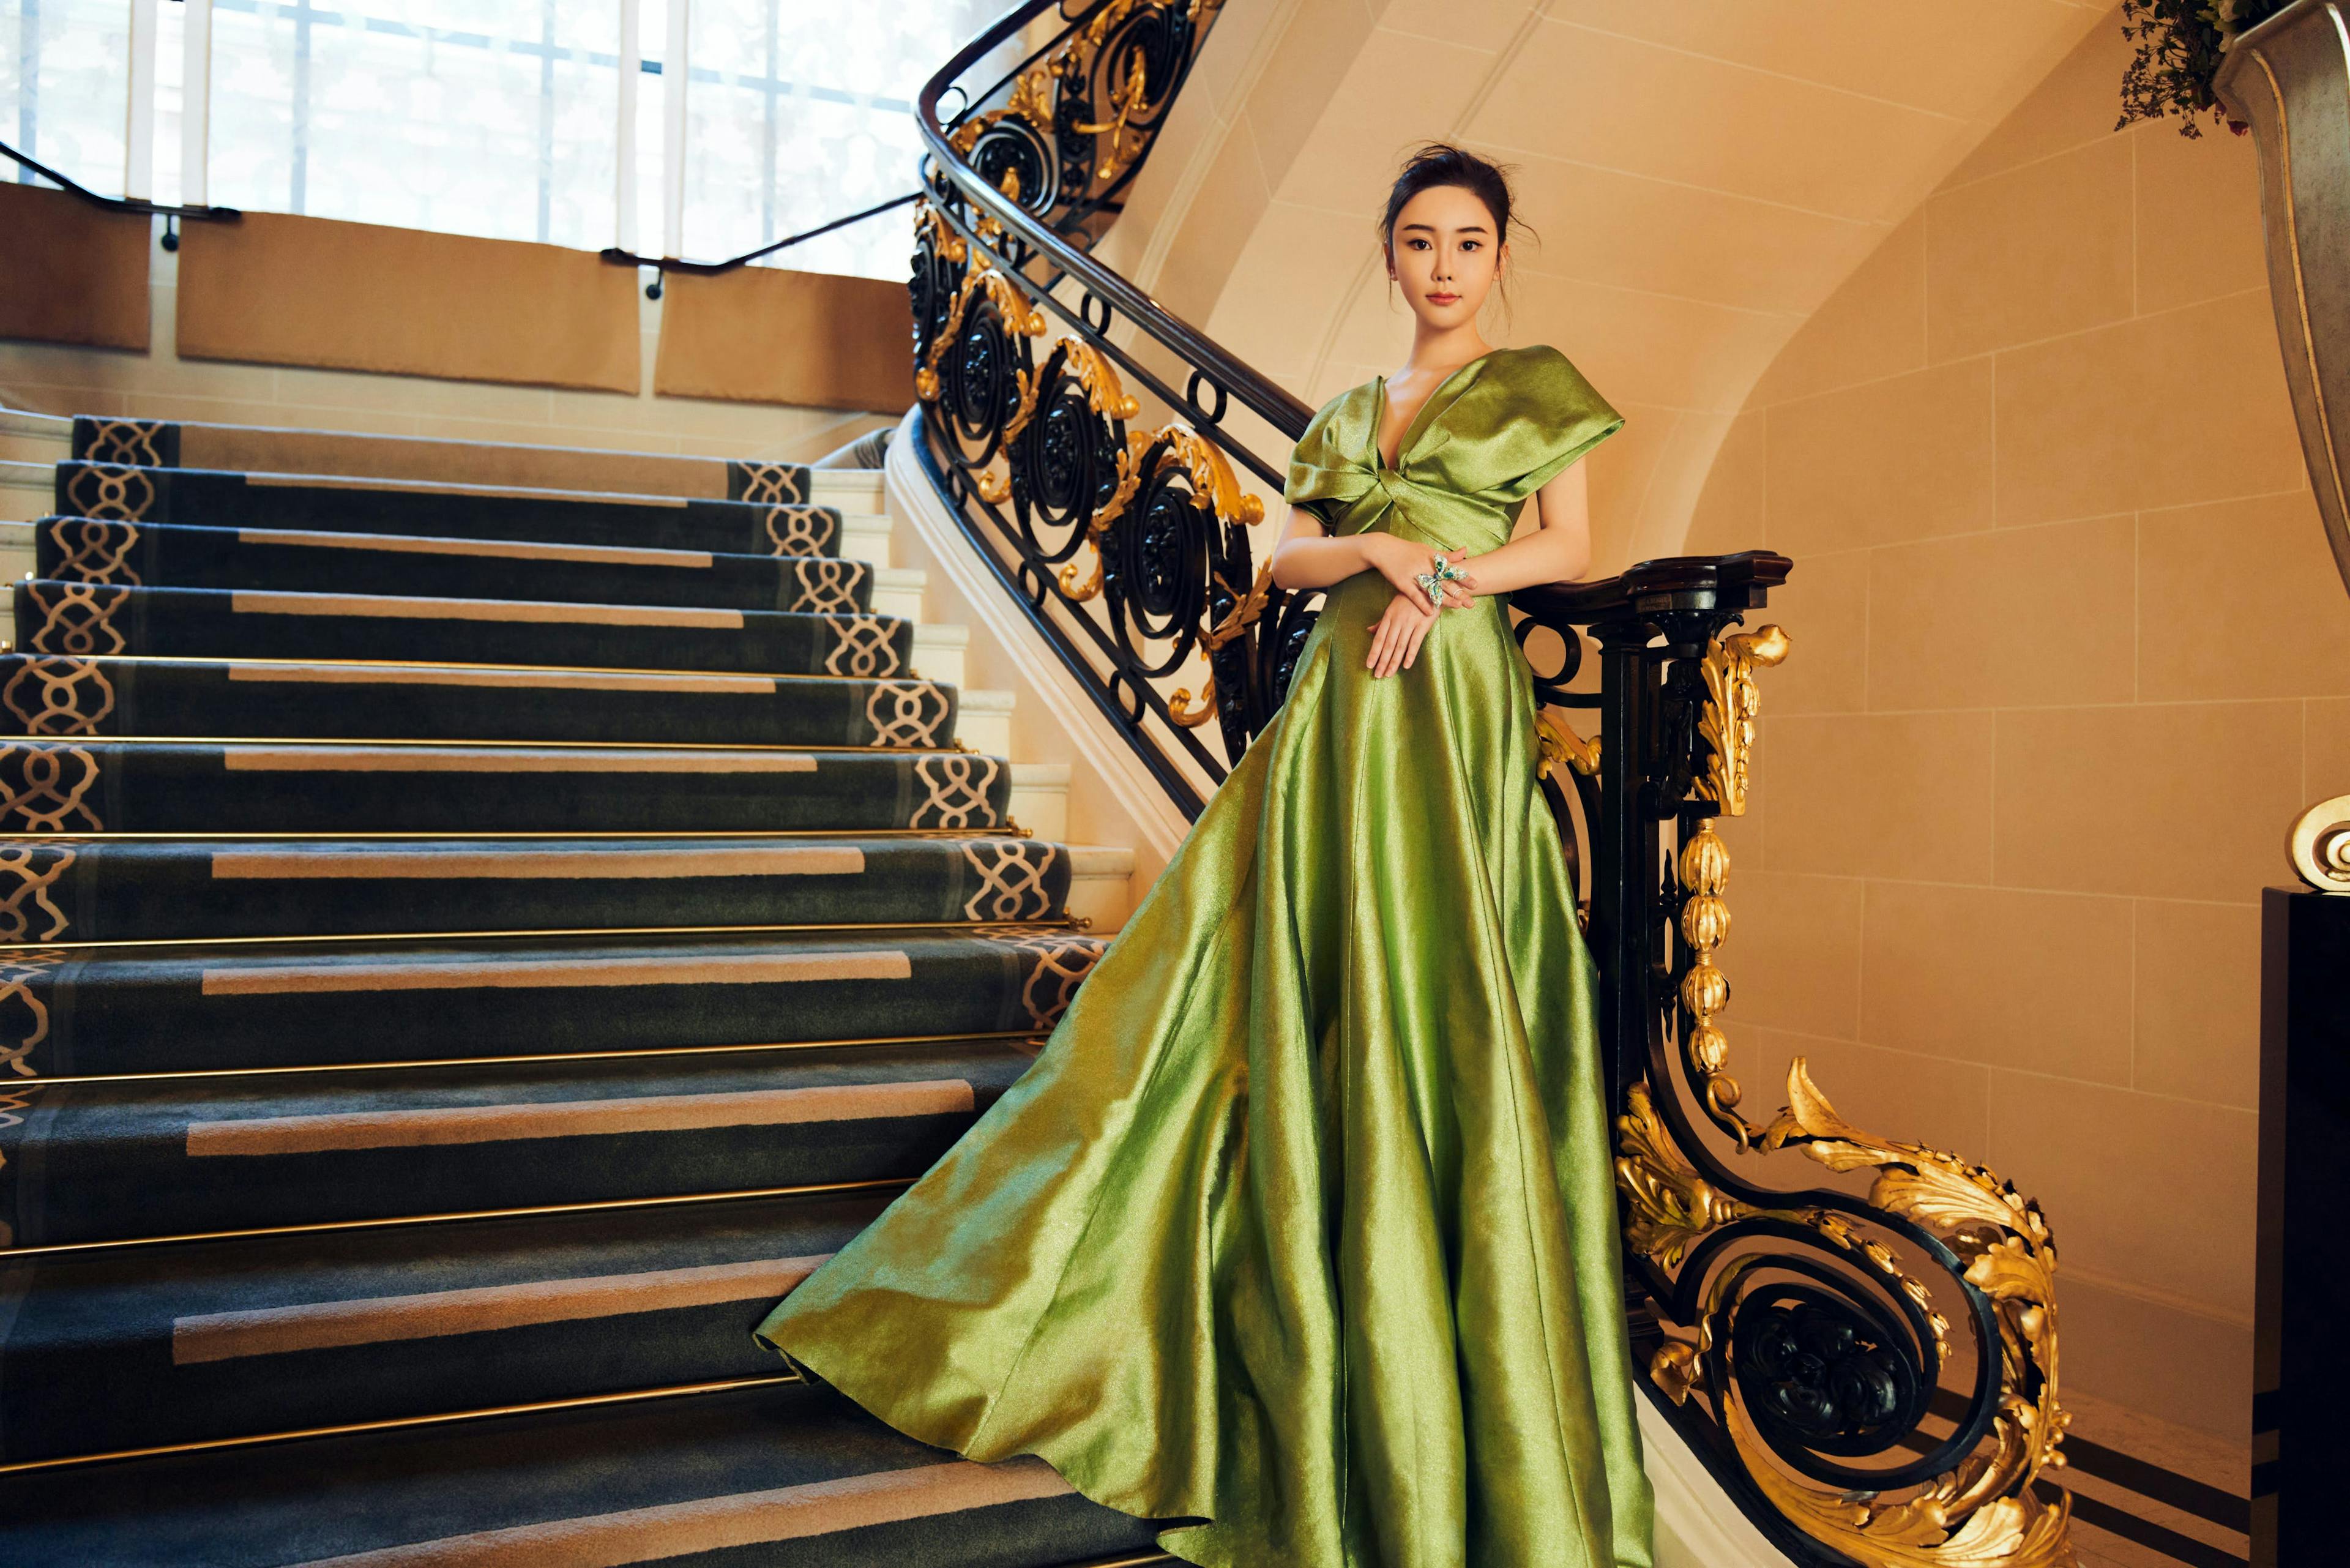 dress evening dress formal wear staircase handrail gown fashion person lady face